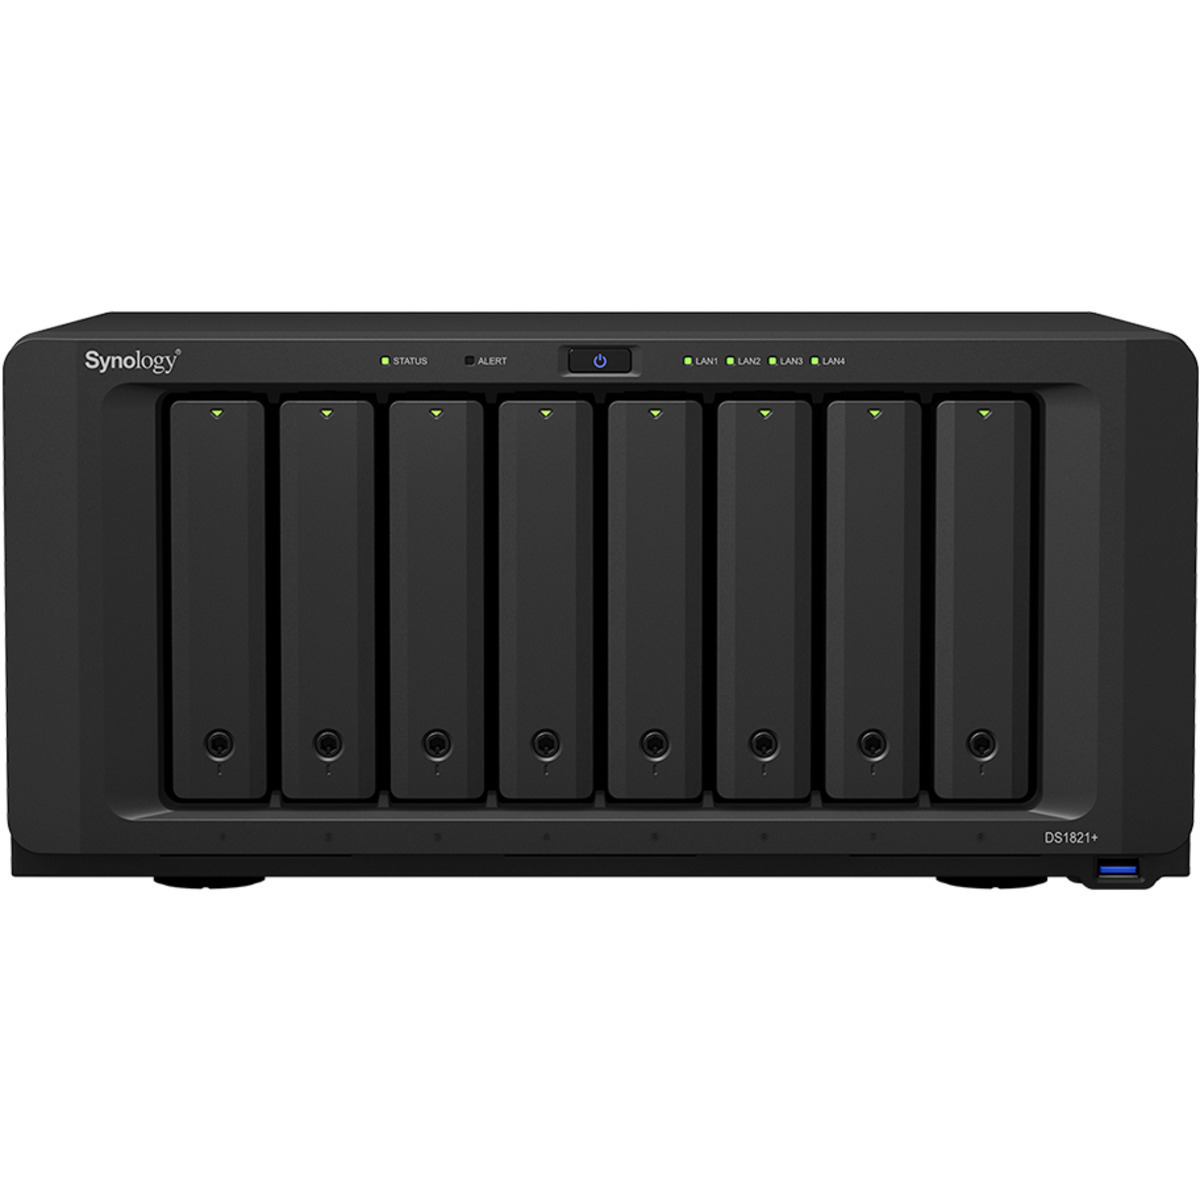 buy $2542 Synology DiskStation DS1821+ 48tb Desktop NAS - Network Attached Storage Device 8x6000gb Western Digital Blue WD60EZAZ 3.5 5400rpm SATA 6Gb/s HDD CONSUMER Class Drives Installed - Burn-In Tested - FREE RAM UPGRADE - nas headquarters buy network attached storage server device das new raid-5 free shipping usa christmas new year holiday sale DiskStation DS1821+